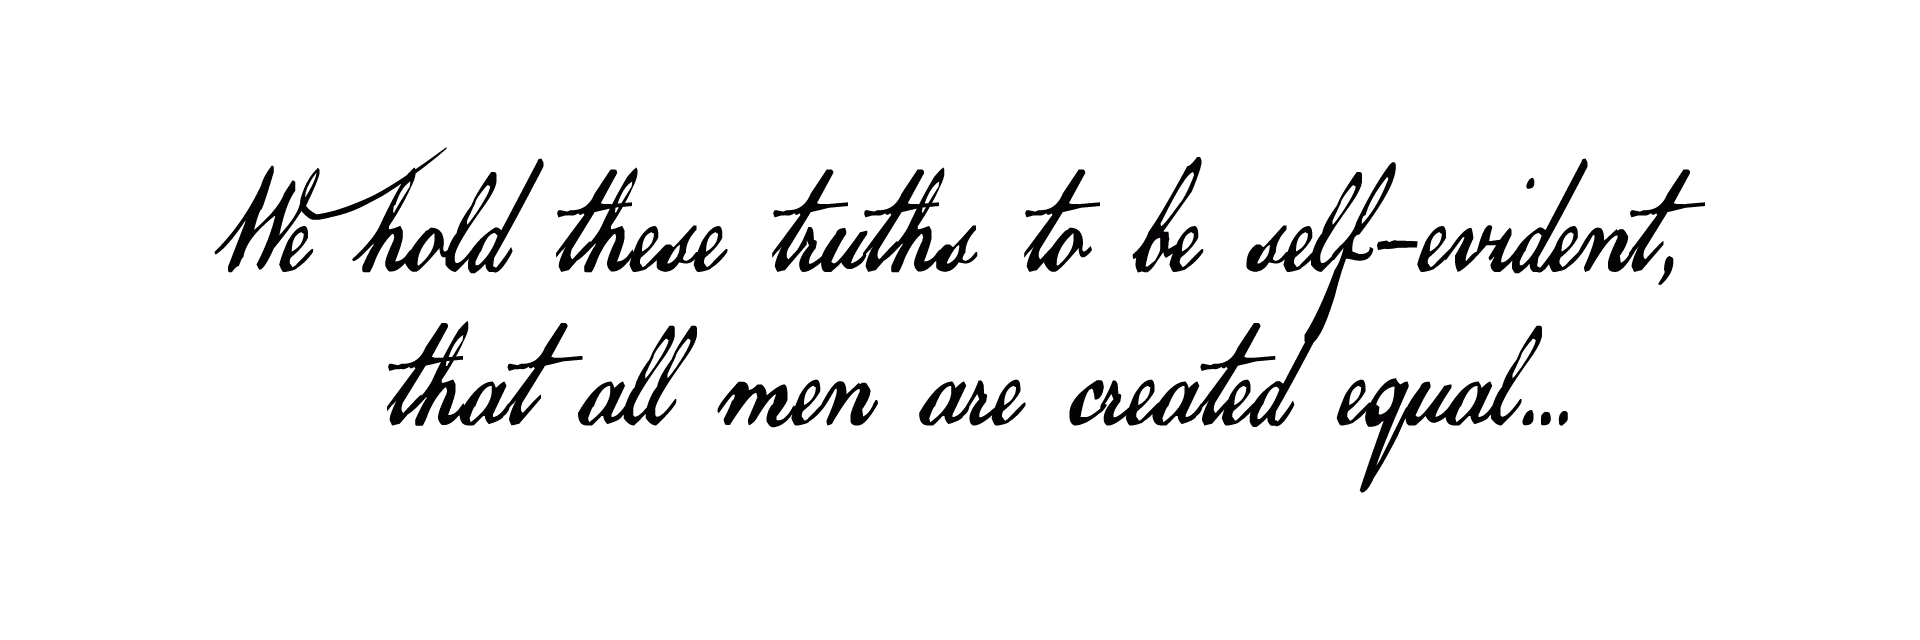 We hold these truths to be self-evident, that all men are created equal...